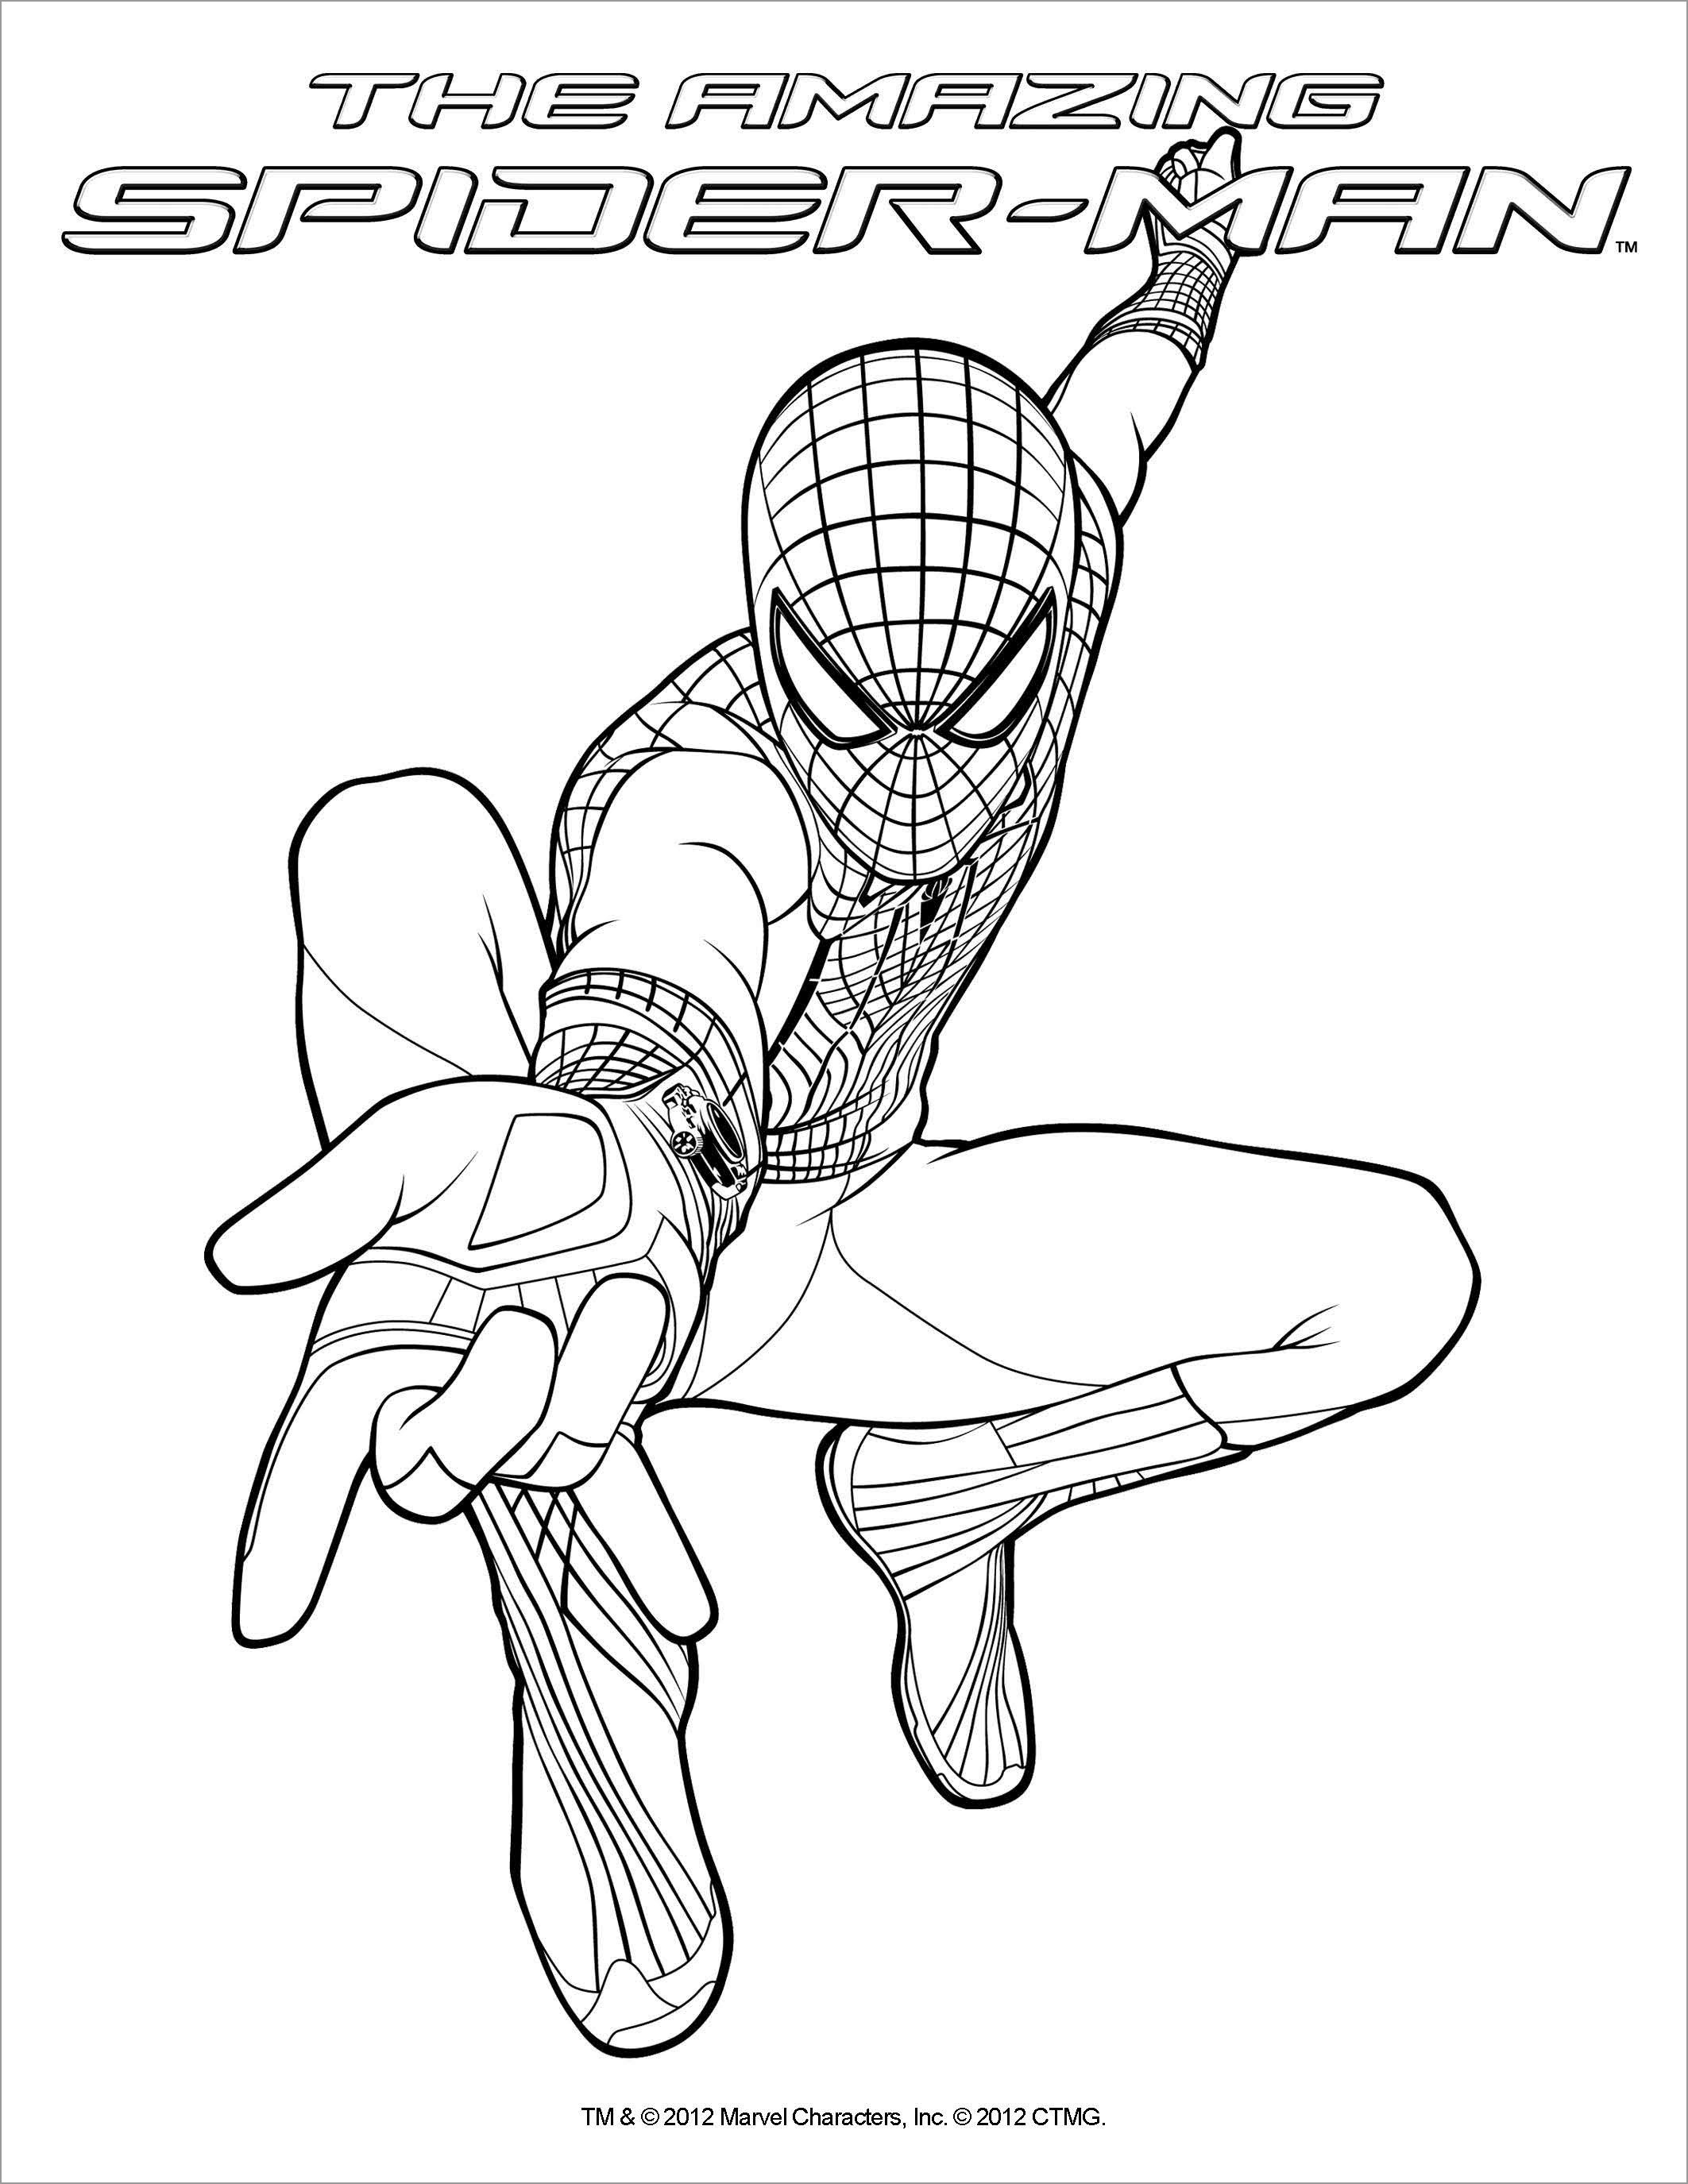 Amazing Spiderman Coloring Pages   ColoringBay